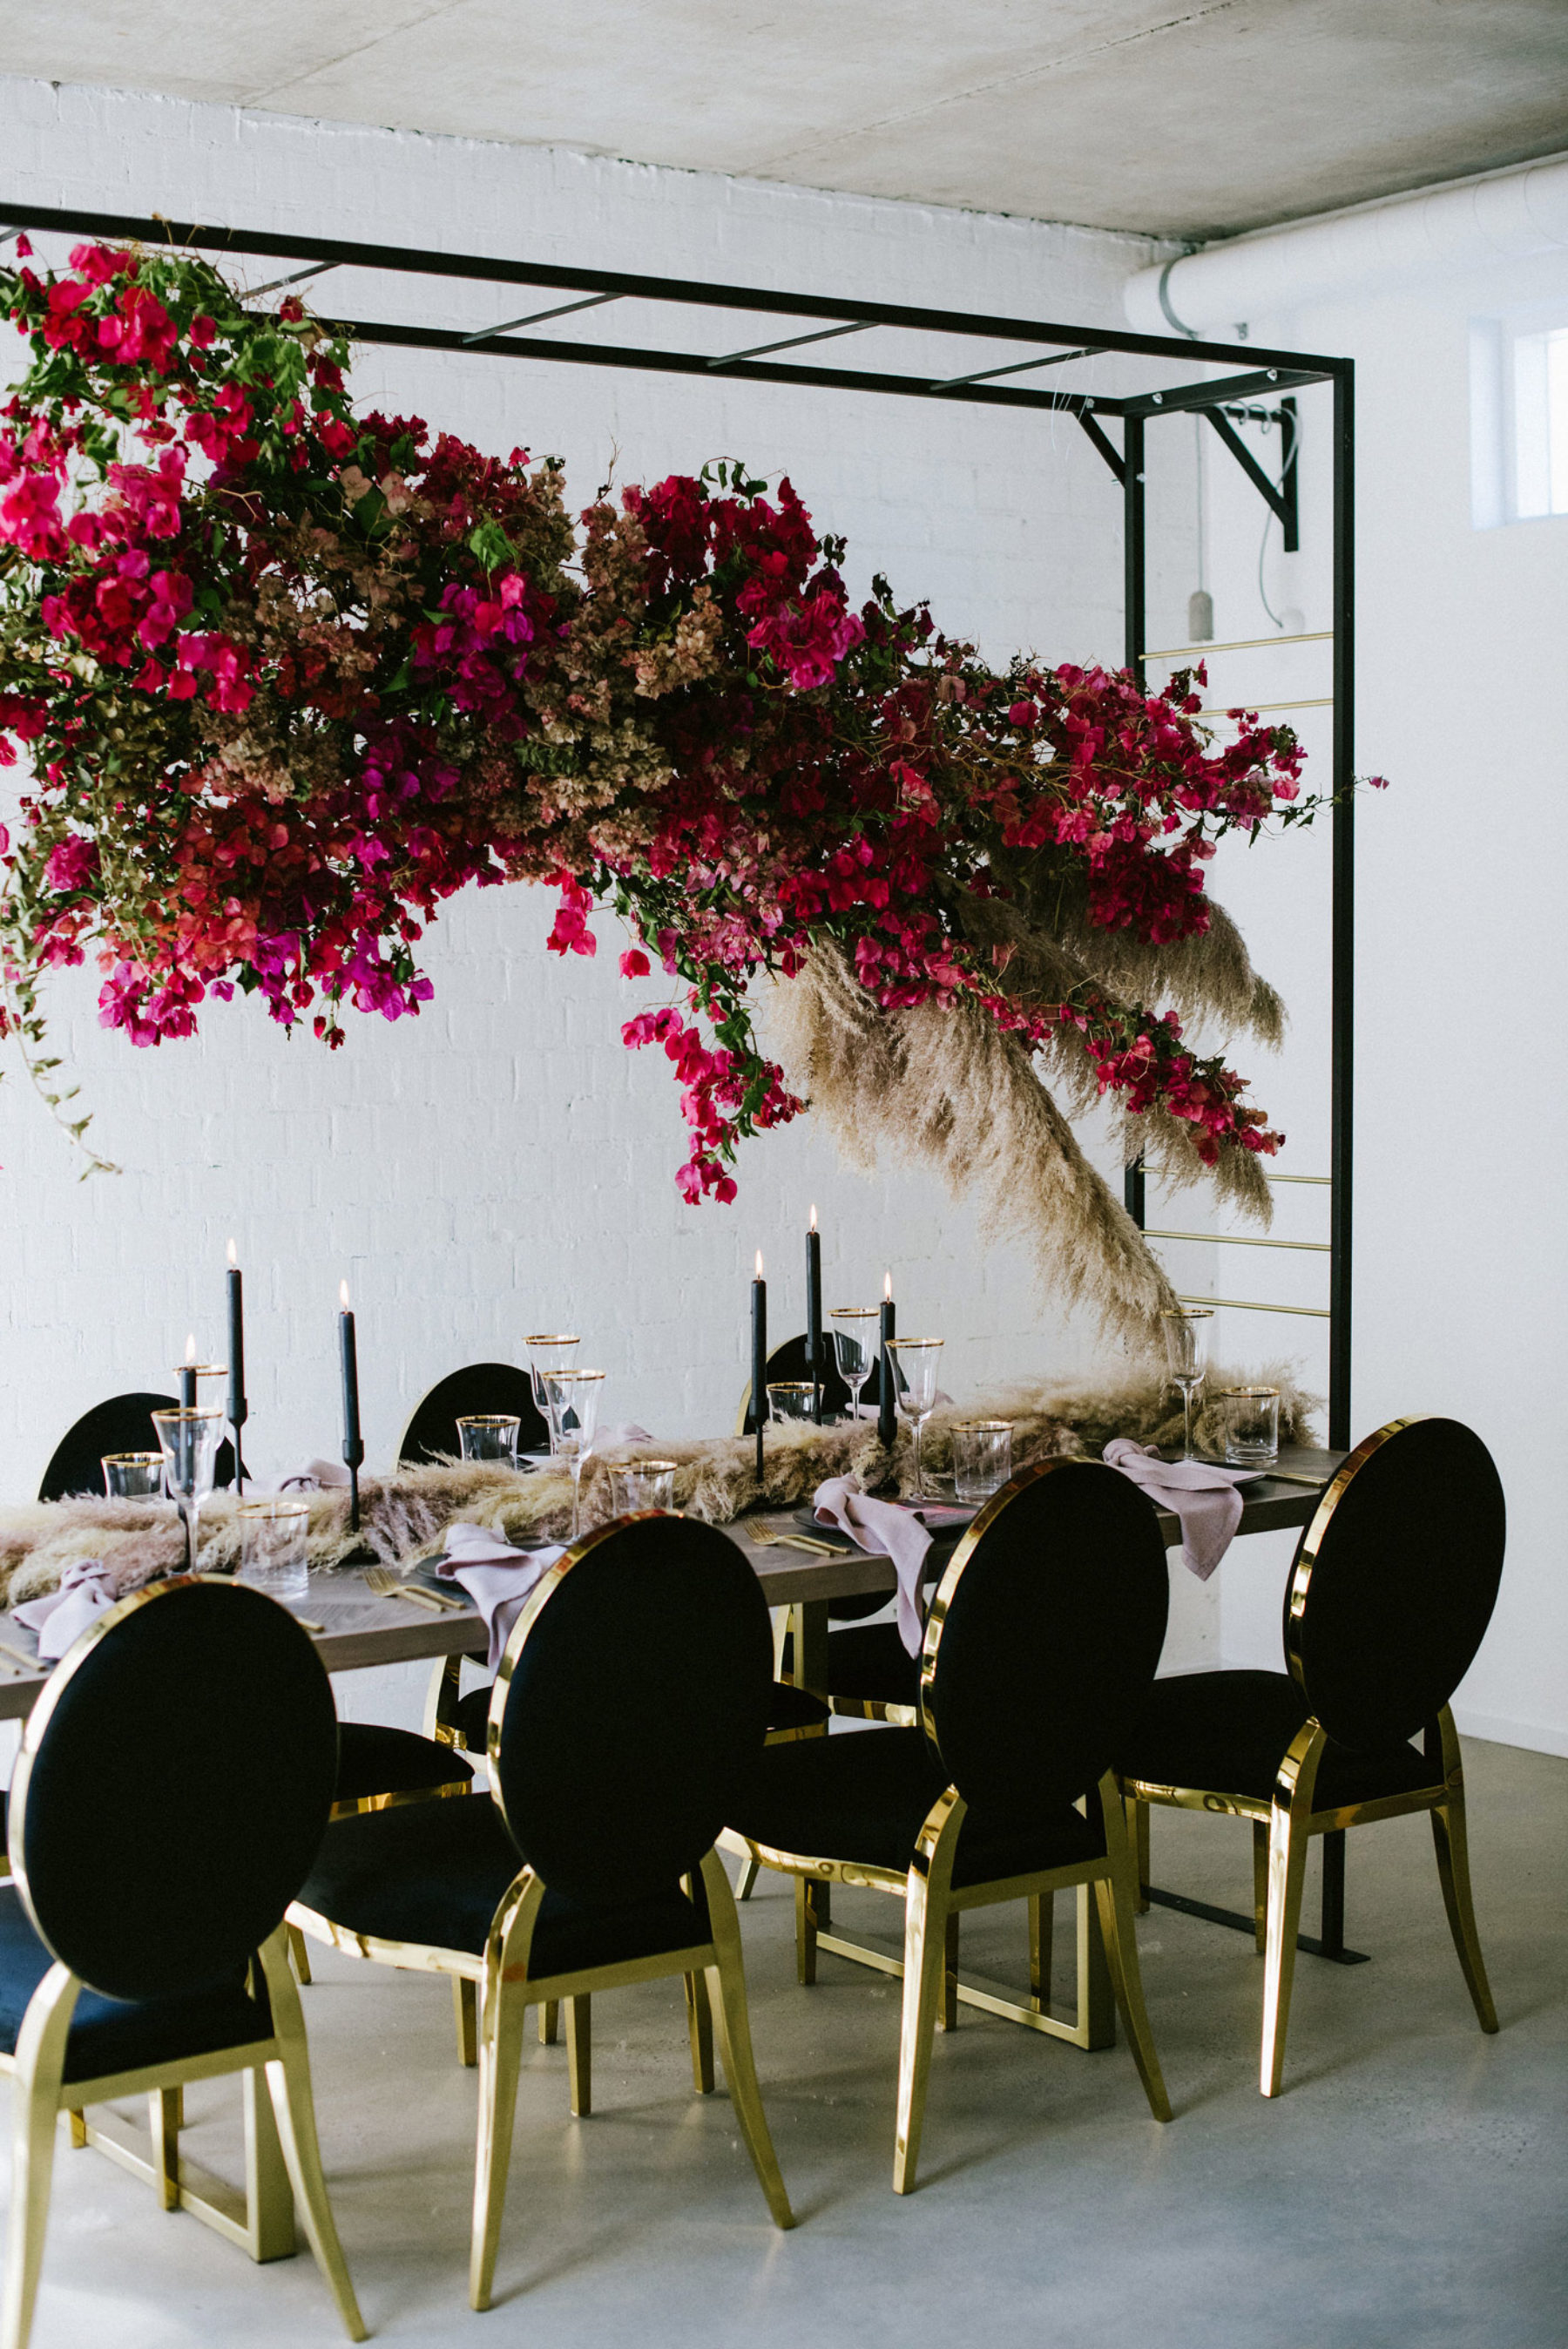 Black and gold wedding reception table decor with hanging red flowers and pampas grass.